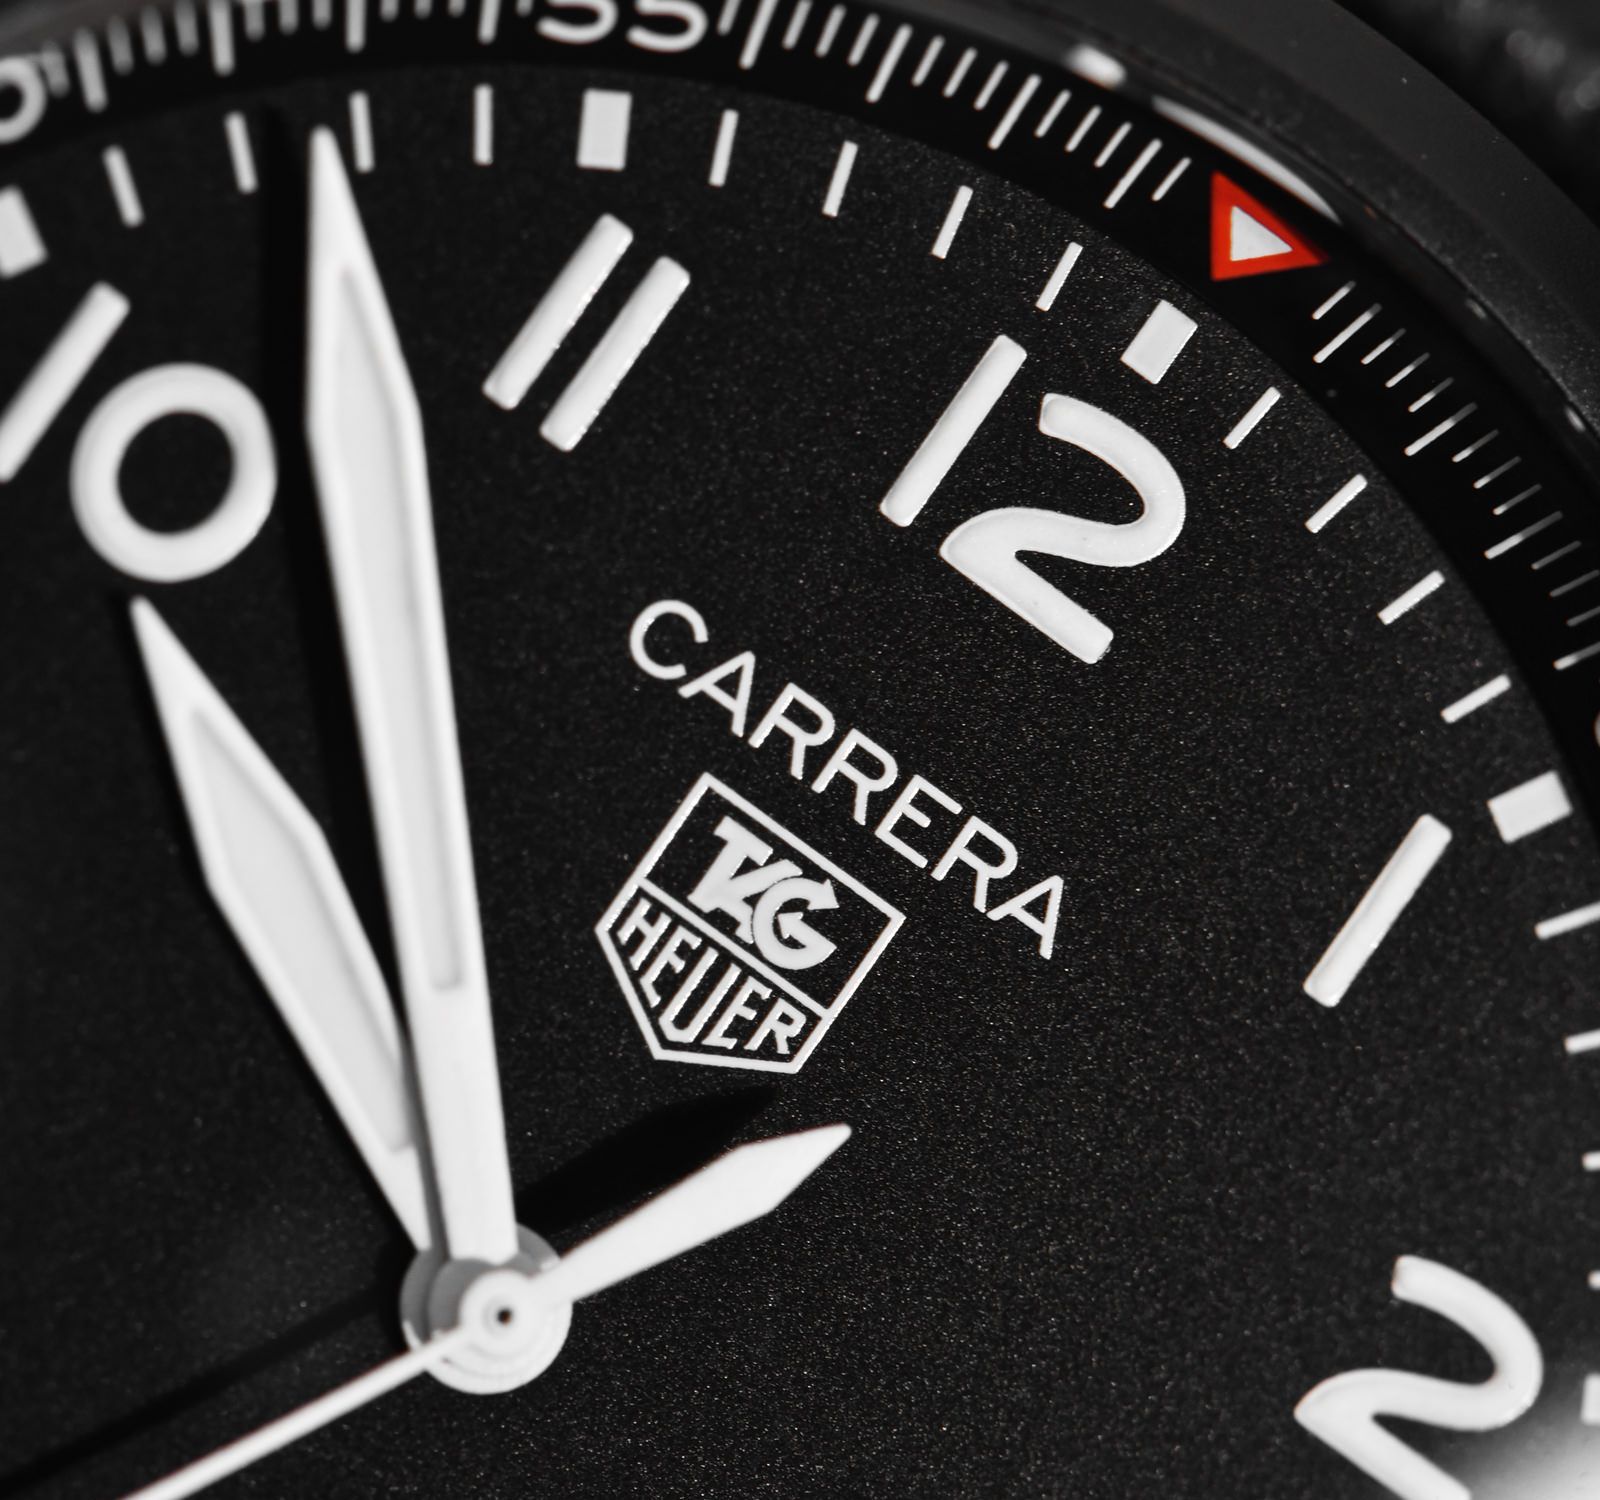 Pre-Owned TAG Heuer Carrera Price